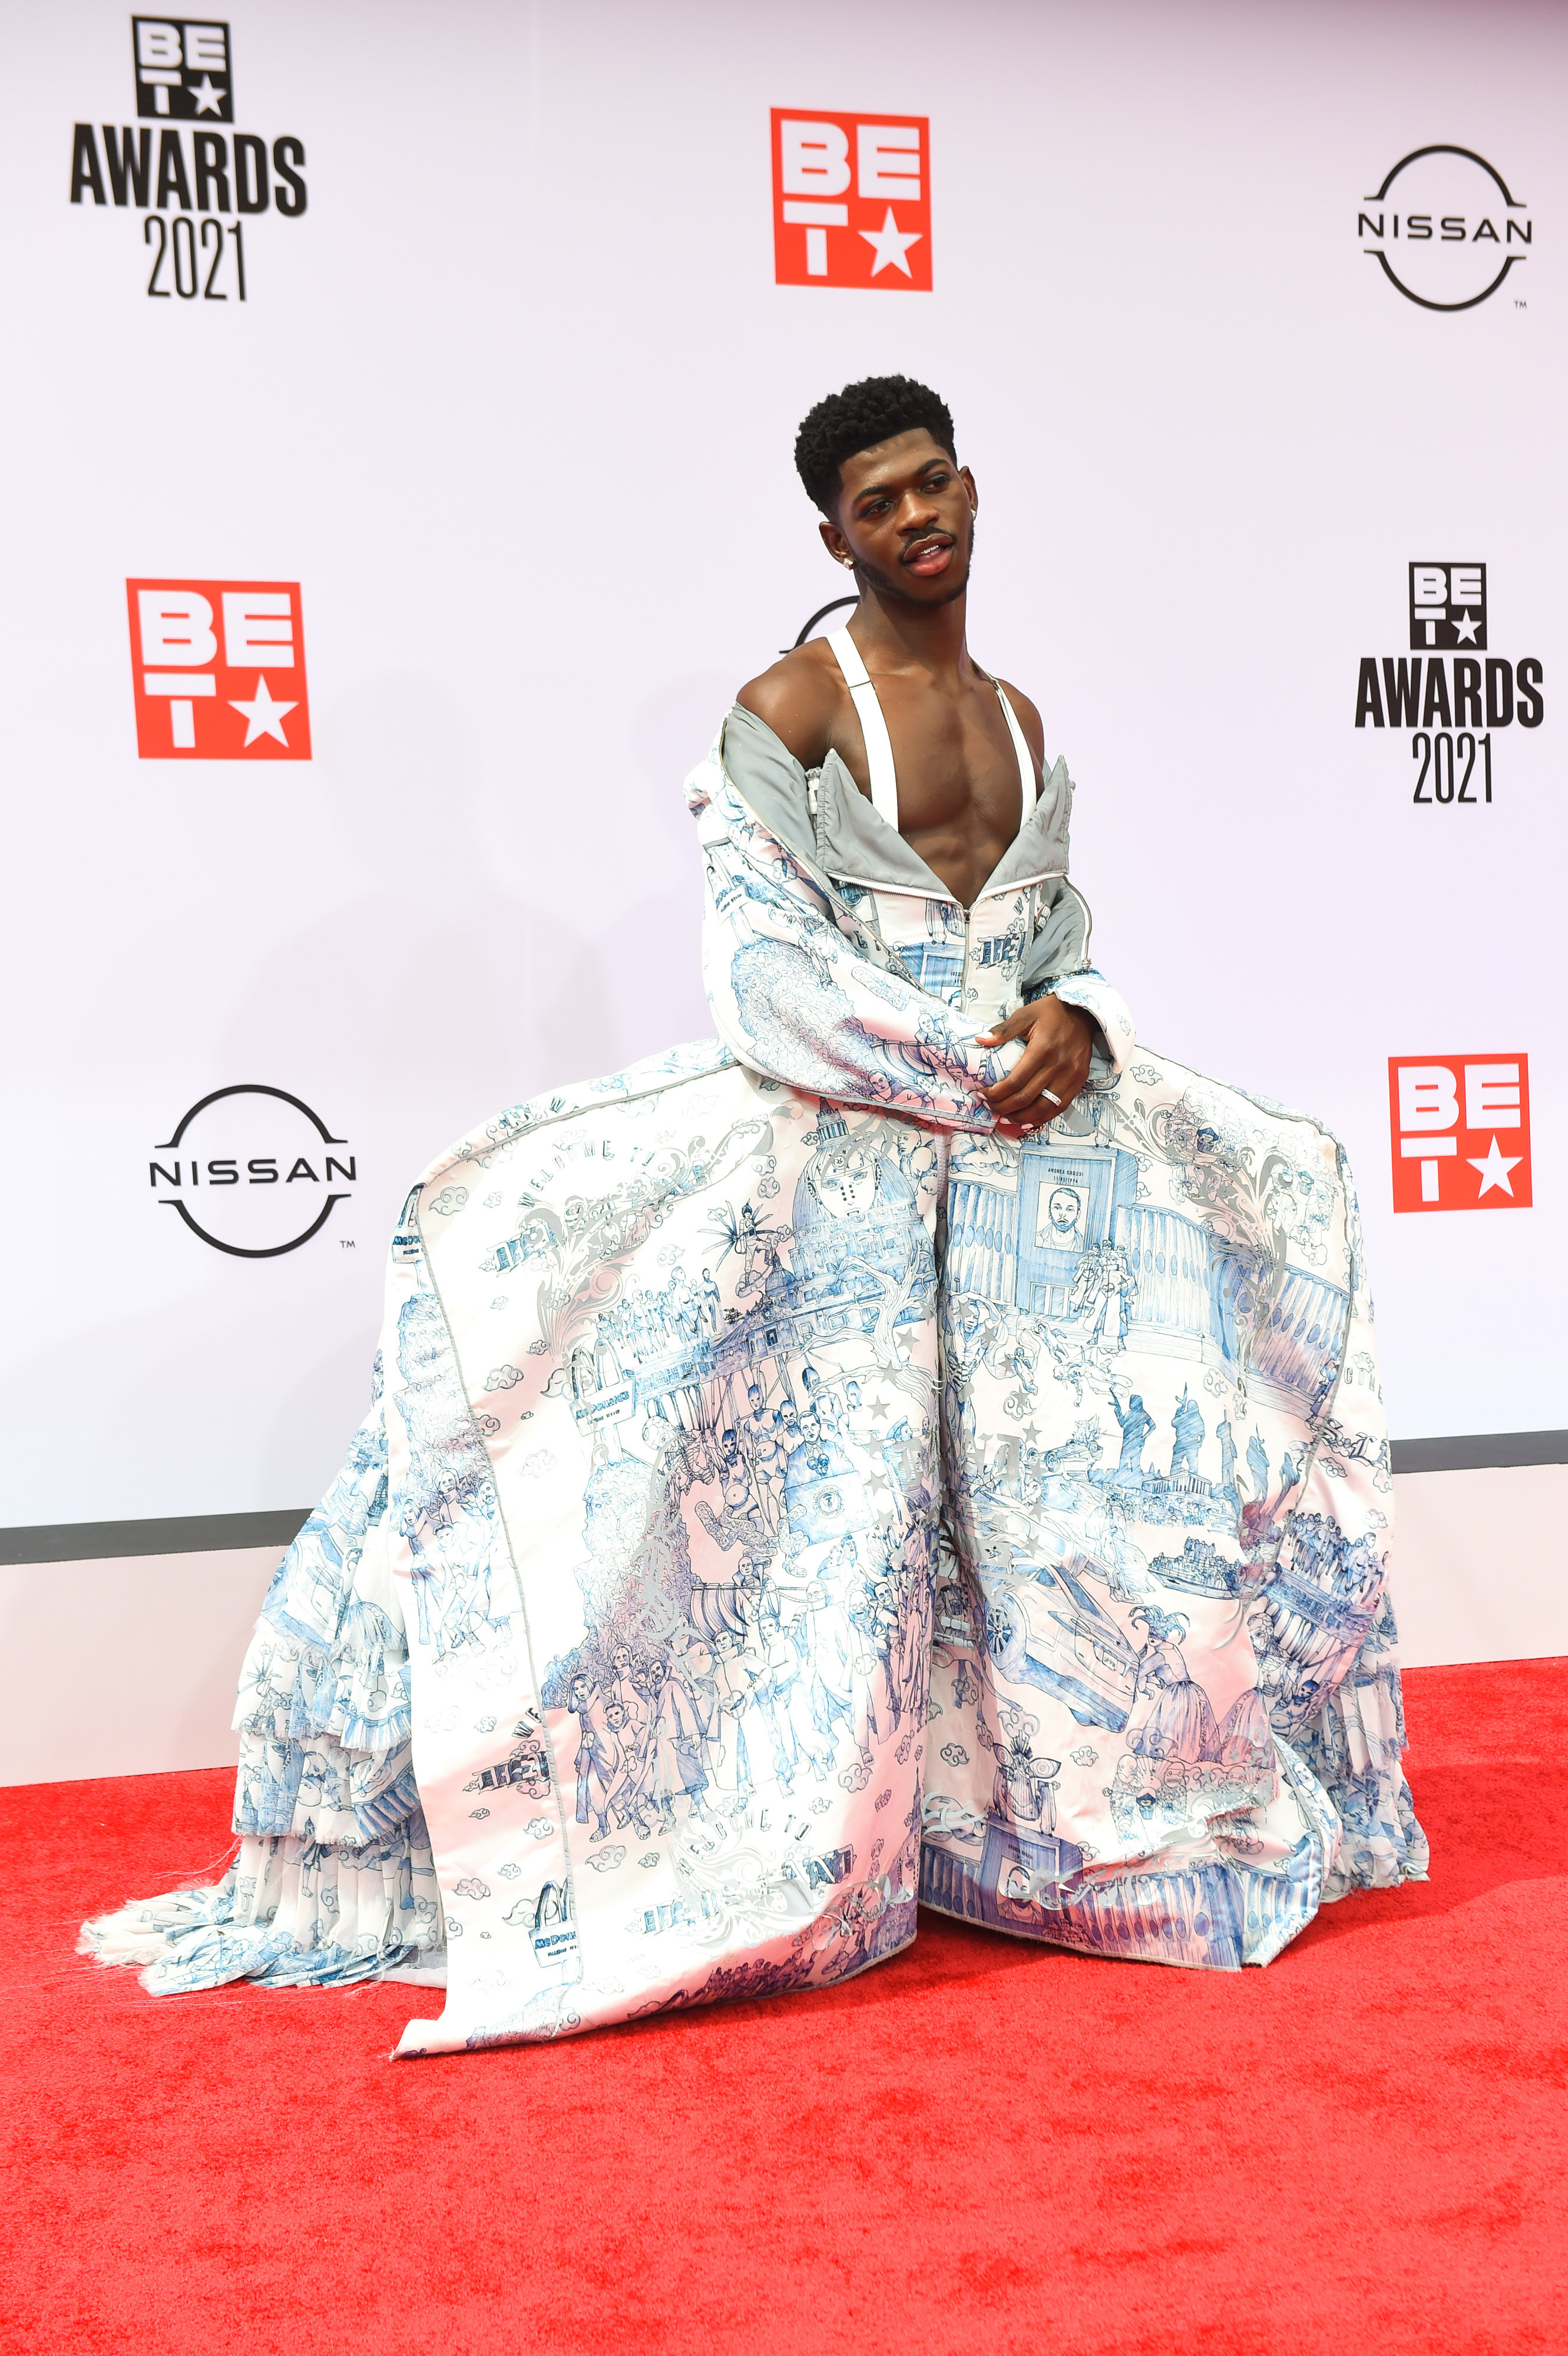 Recording Artist Lil Nas X attends the 2021 BET Awards at the Microsoft Theater